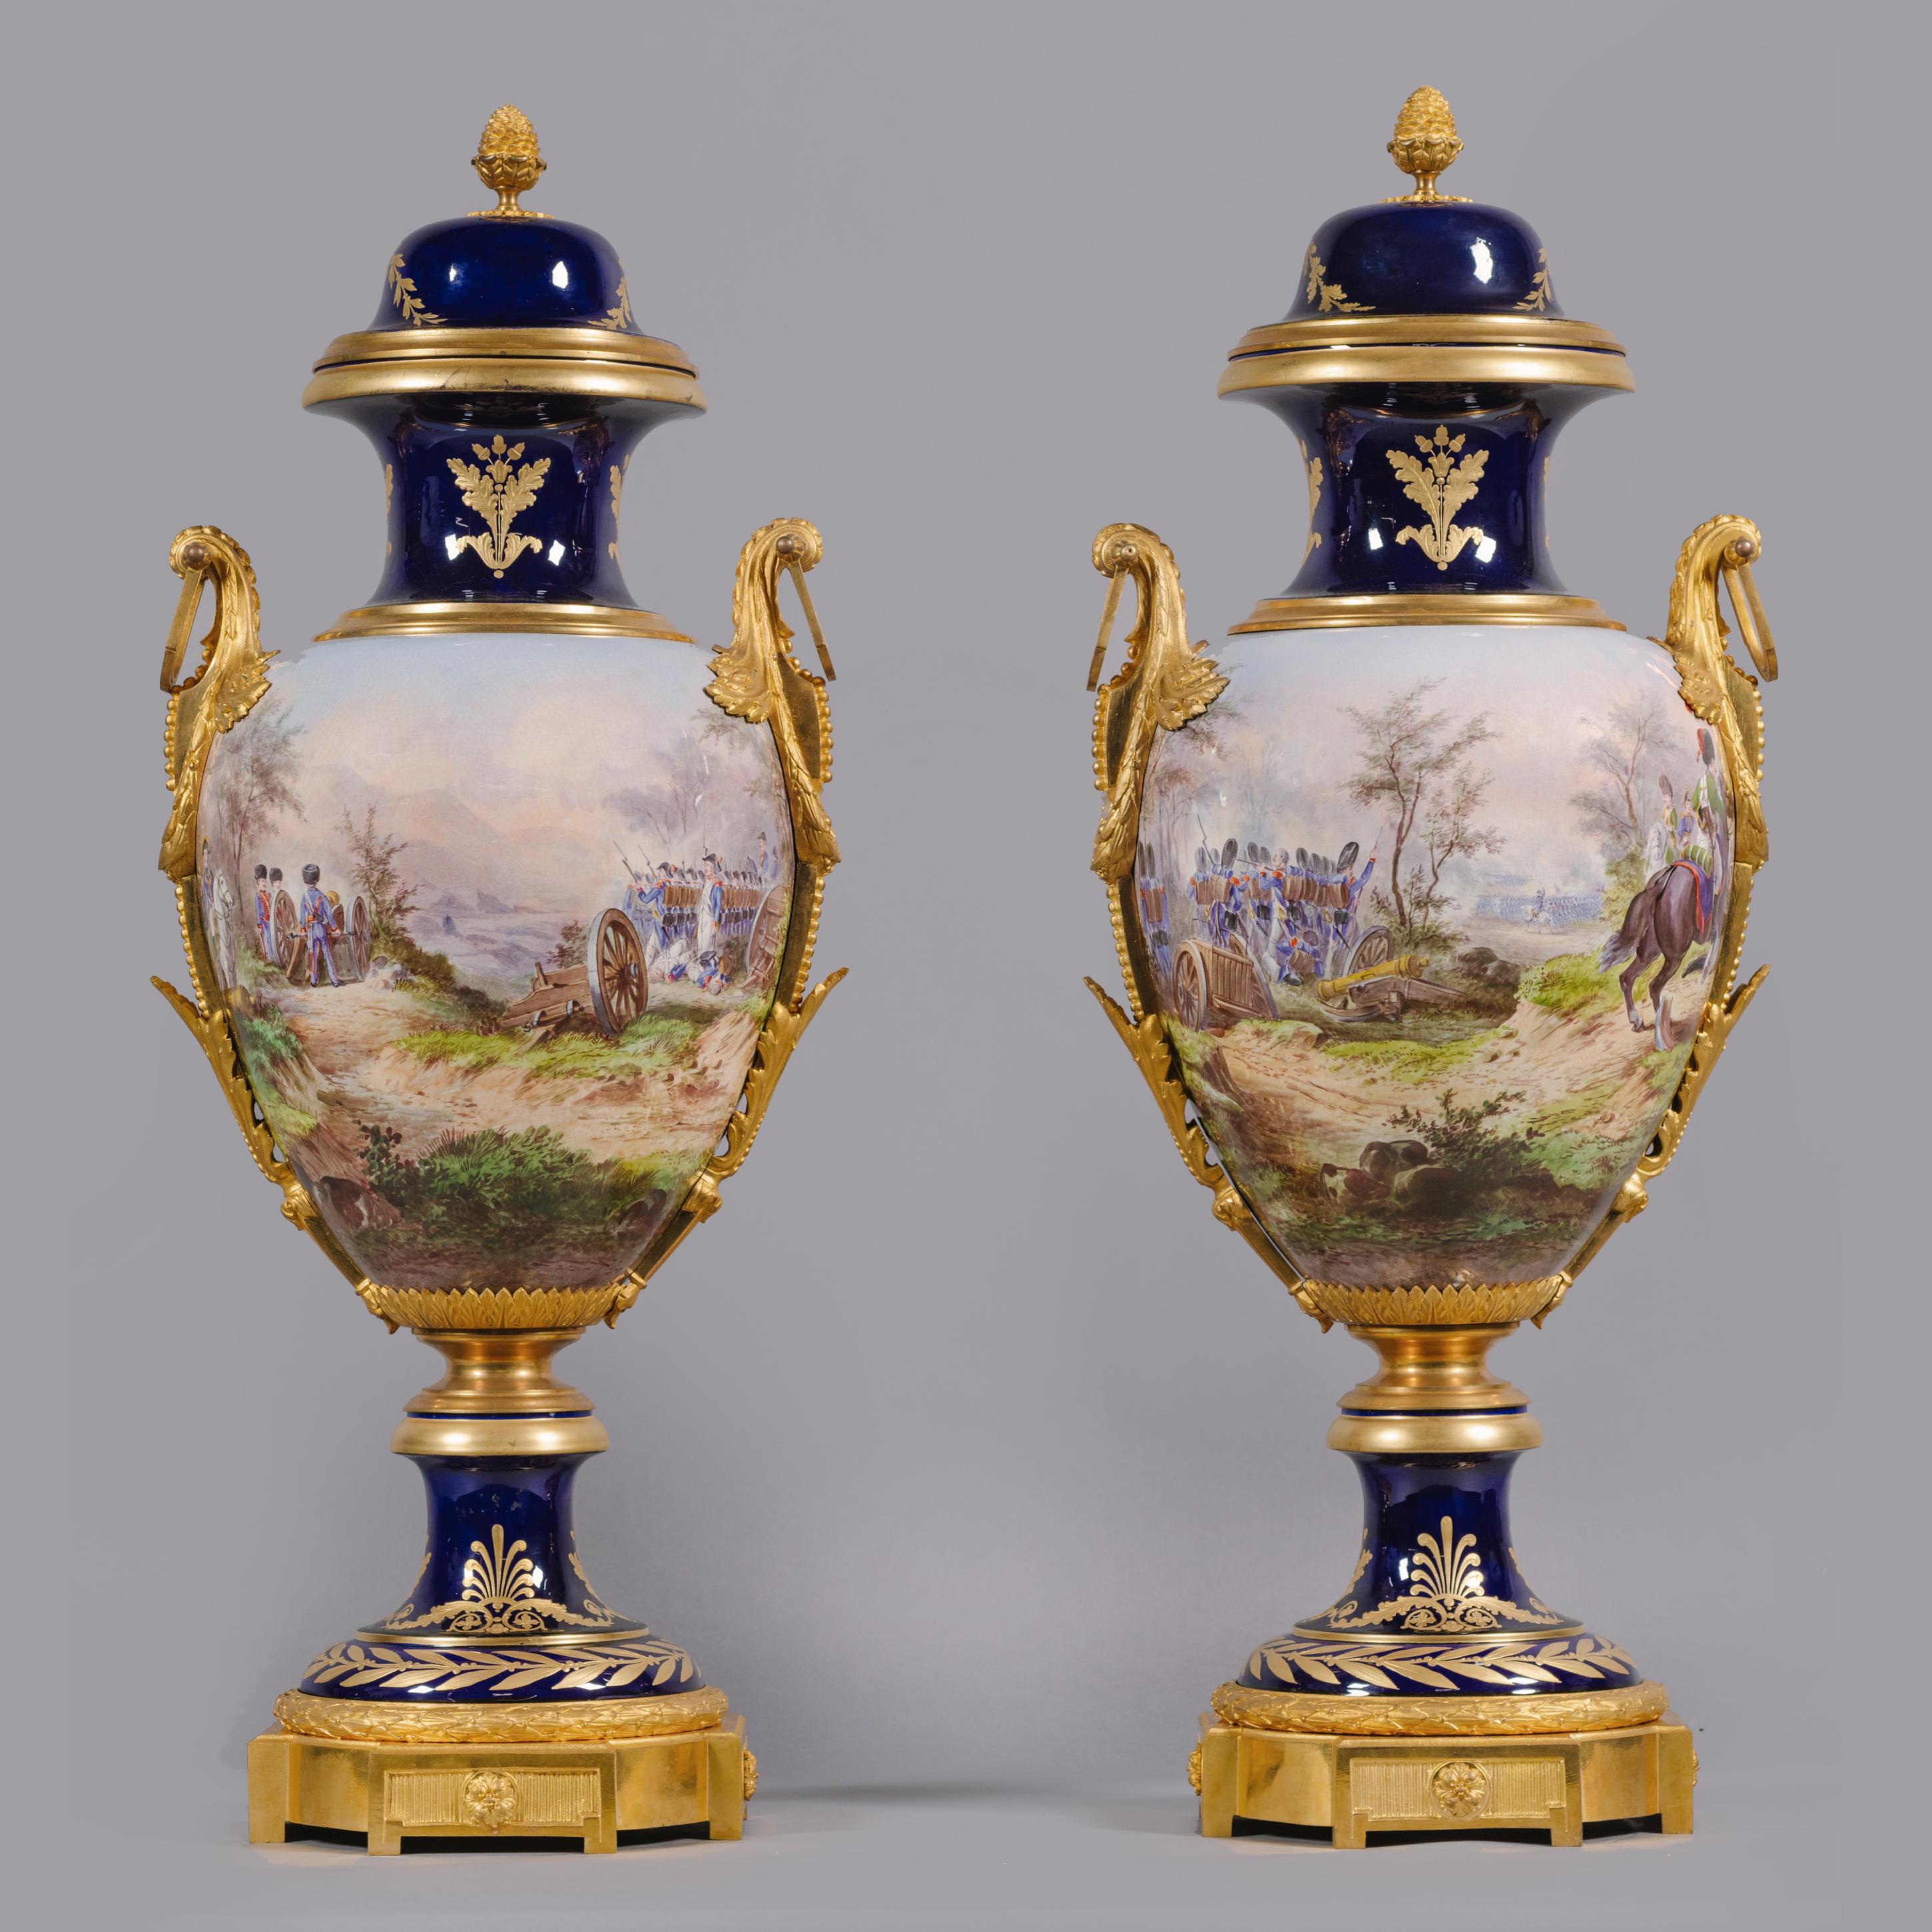 A fine pair of Sèvres-style napoleonic gilt bronze mounted cobalt-blue ground porcelain vases.

Signed by the artist 'H. Desprez Sevres'.

Each vase is of inverted ovoid form finely painted all-over with Napoleonic battle scenes, the covers